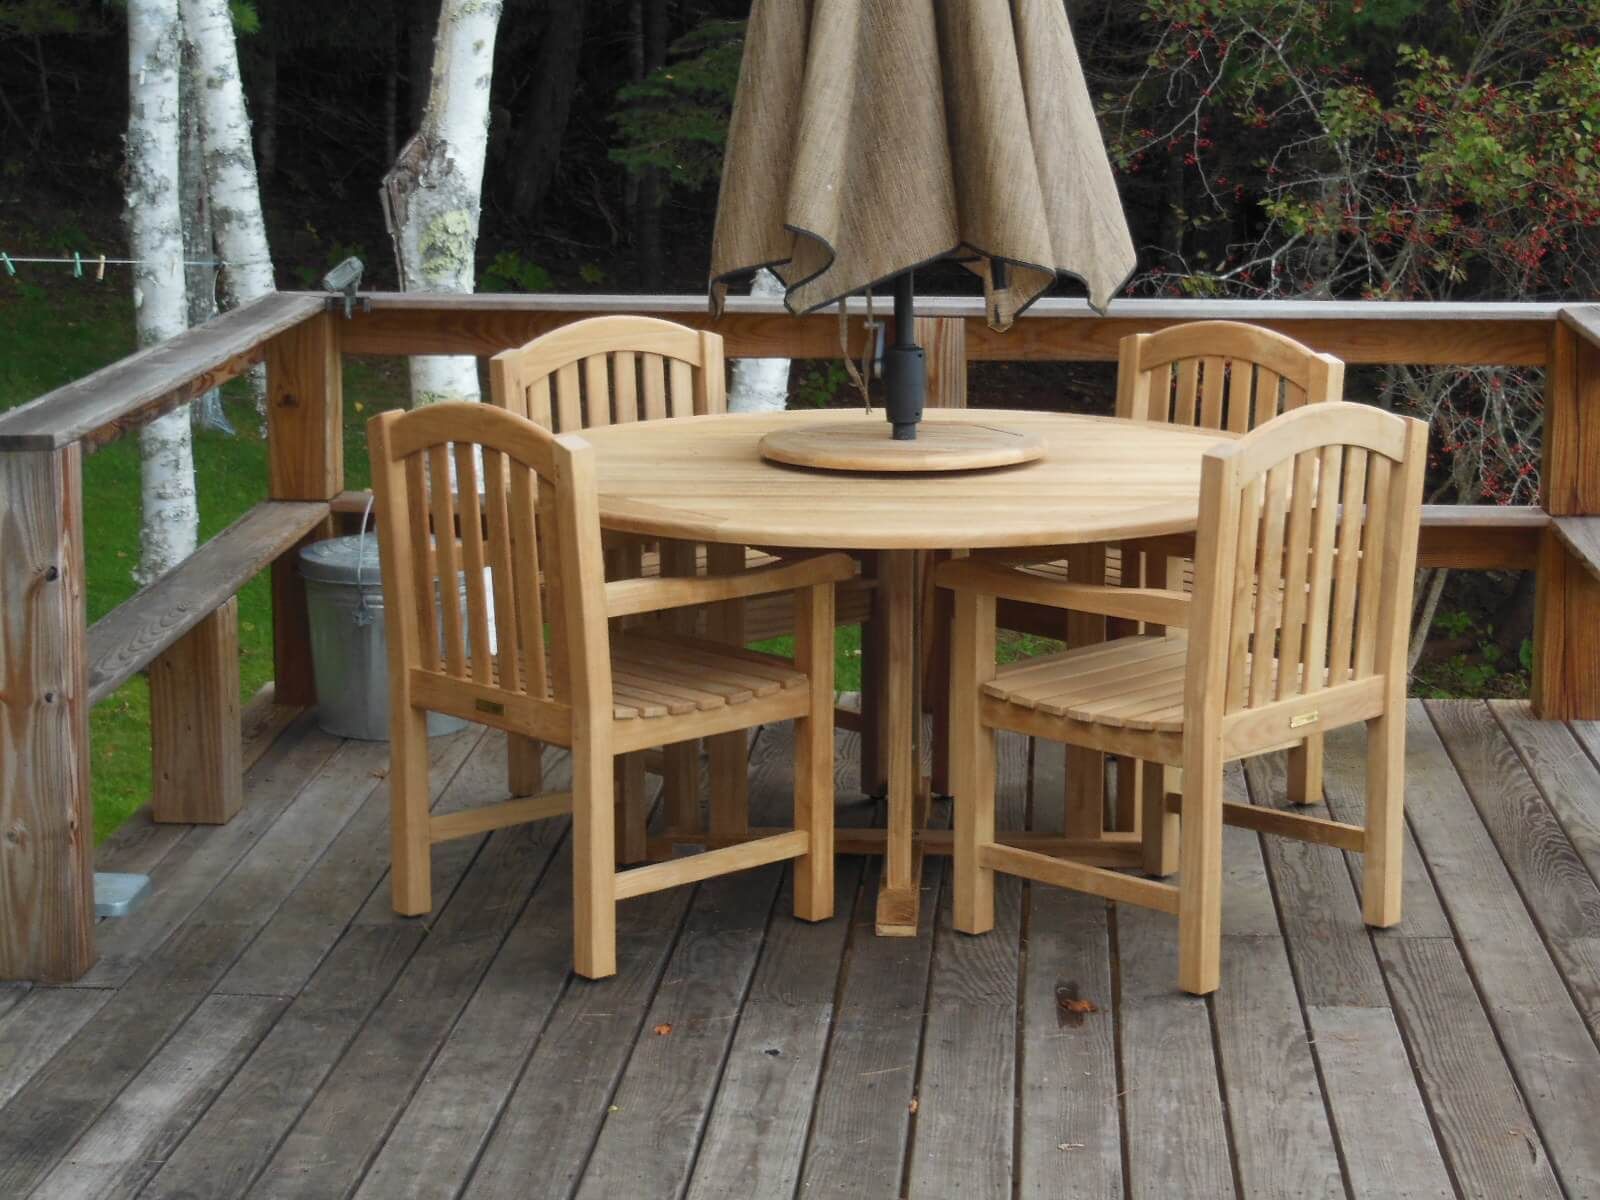 Top Design Trends In Teak Patio Furniture For The Upcoming Season